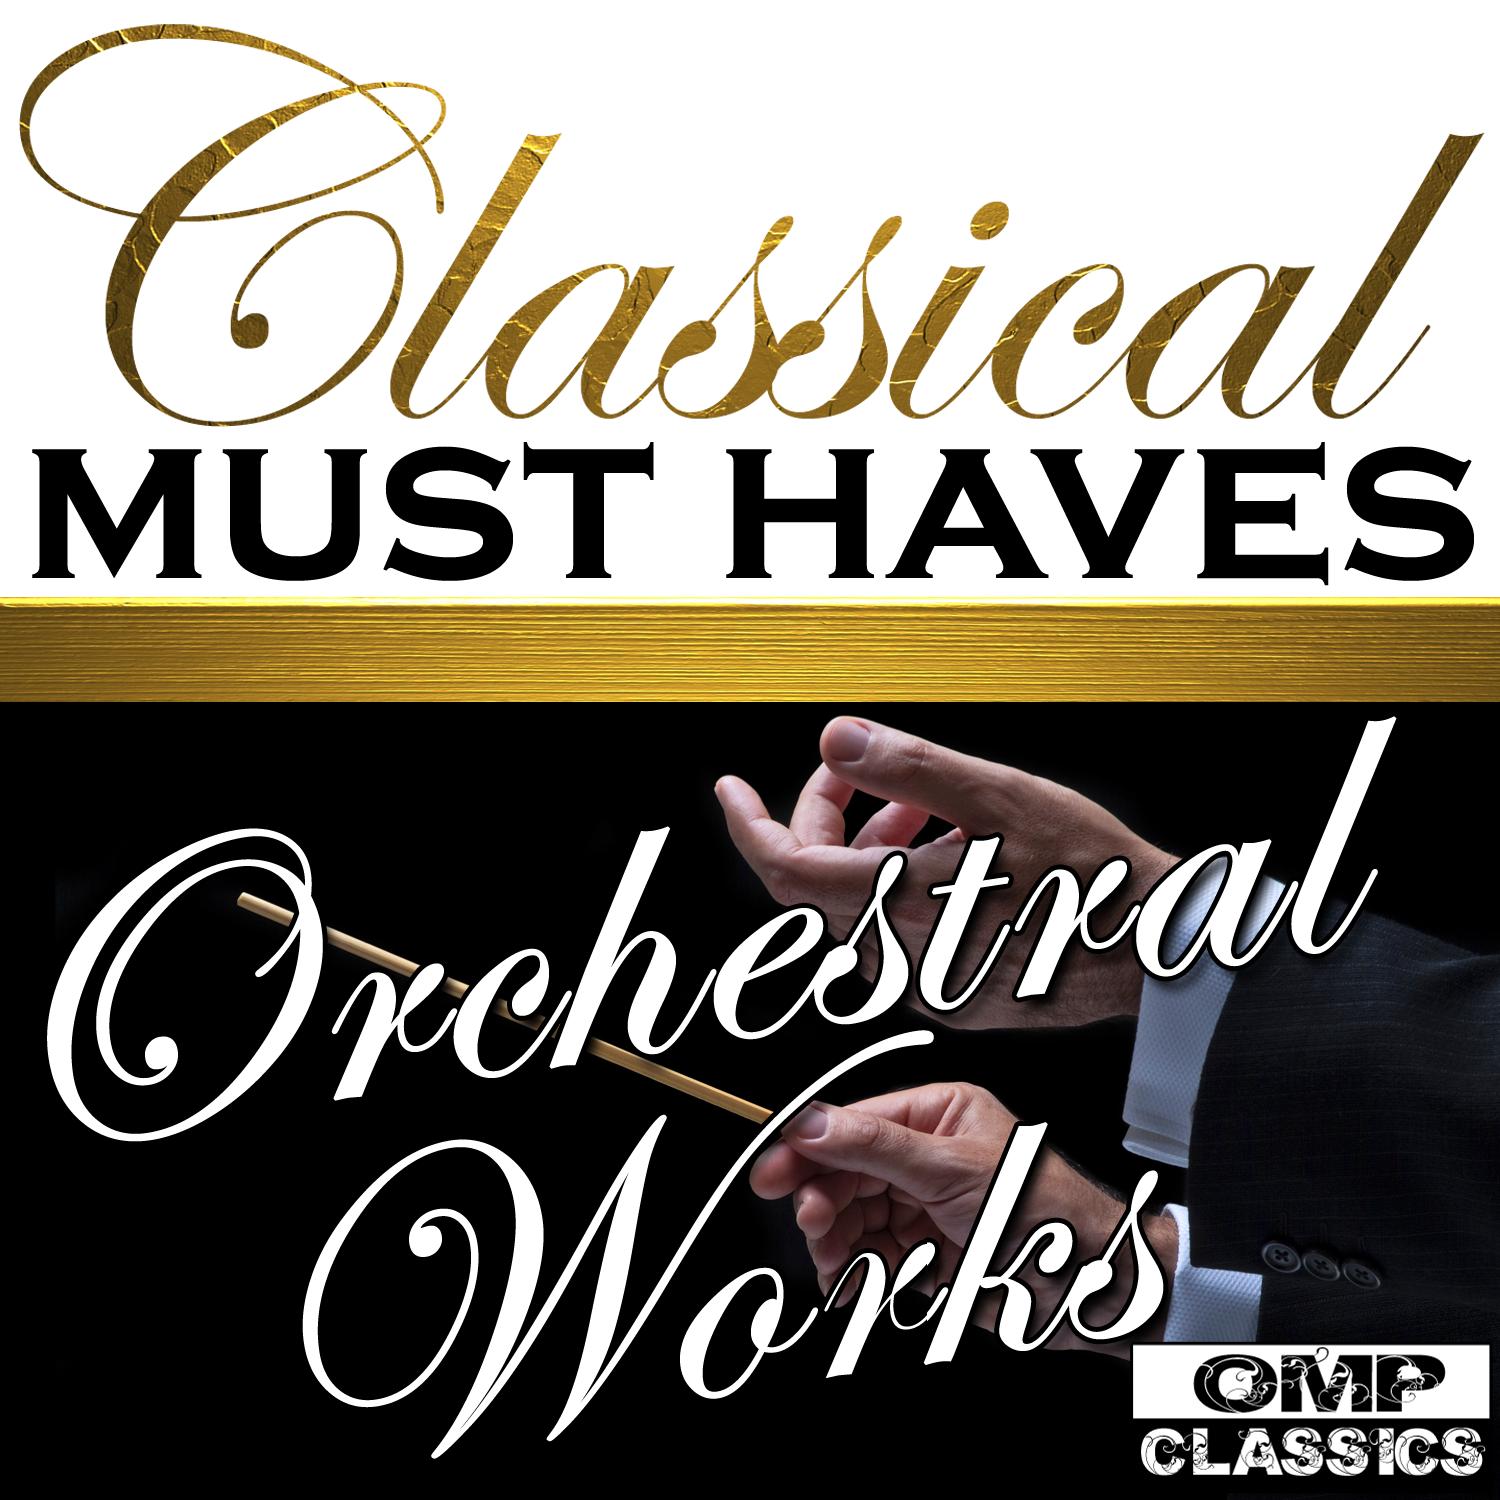 Classical Must Haves: Orchestral Works